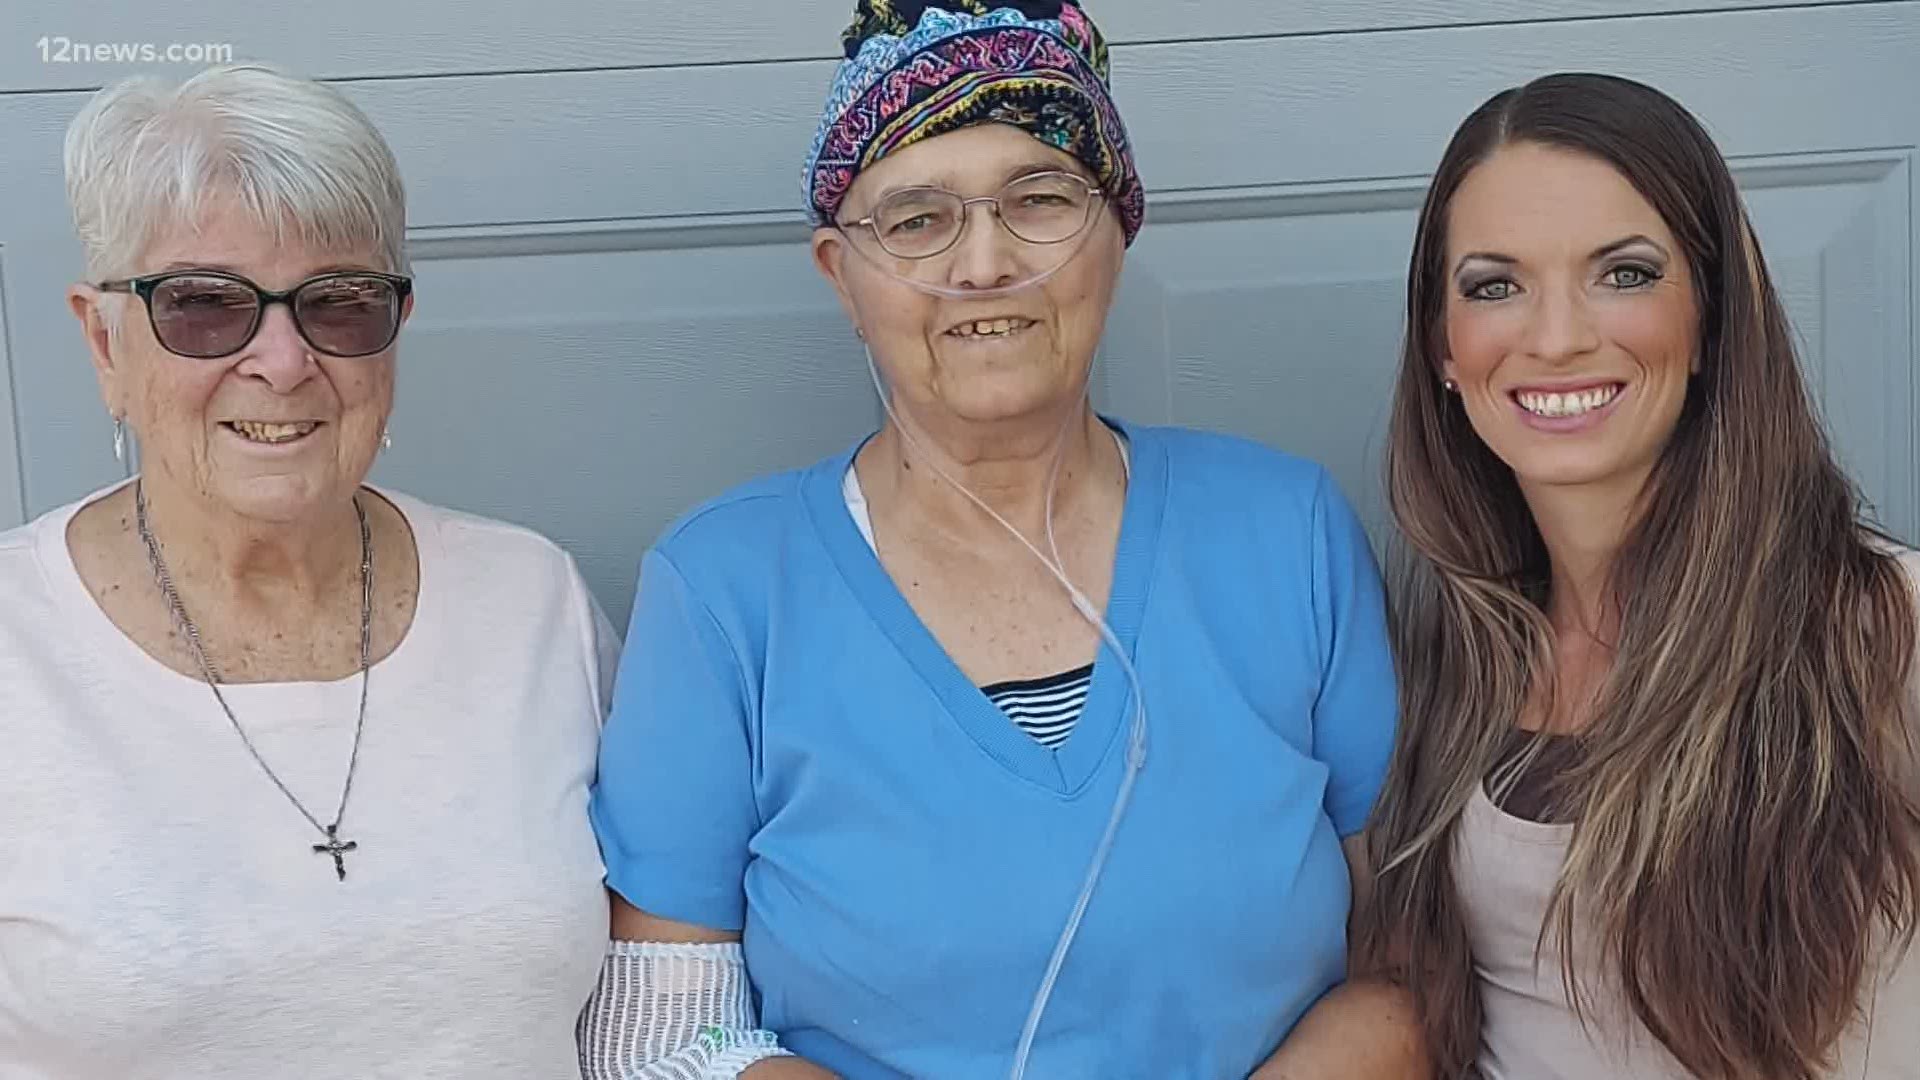 A Kingman Army veteran and teacher defeated COVID-19 and pneumonia. Now, she is turning her fight to beating her stage four cancer diagnosis.